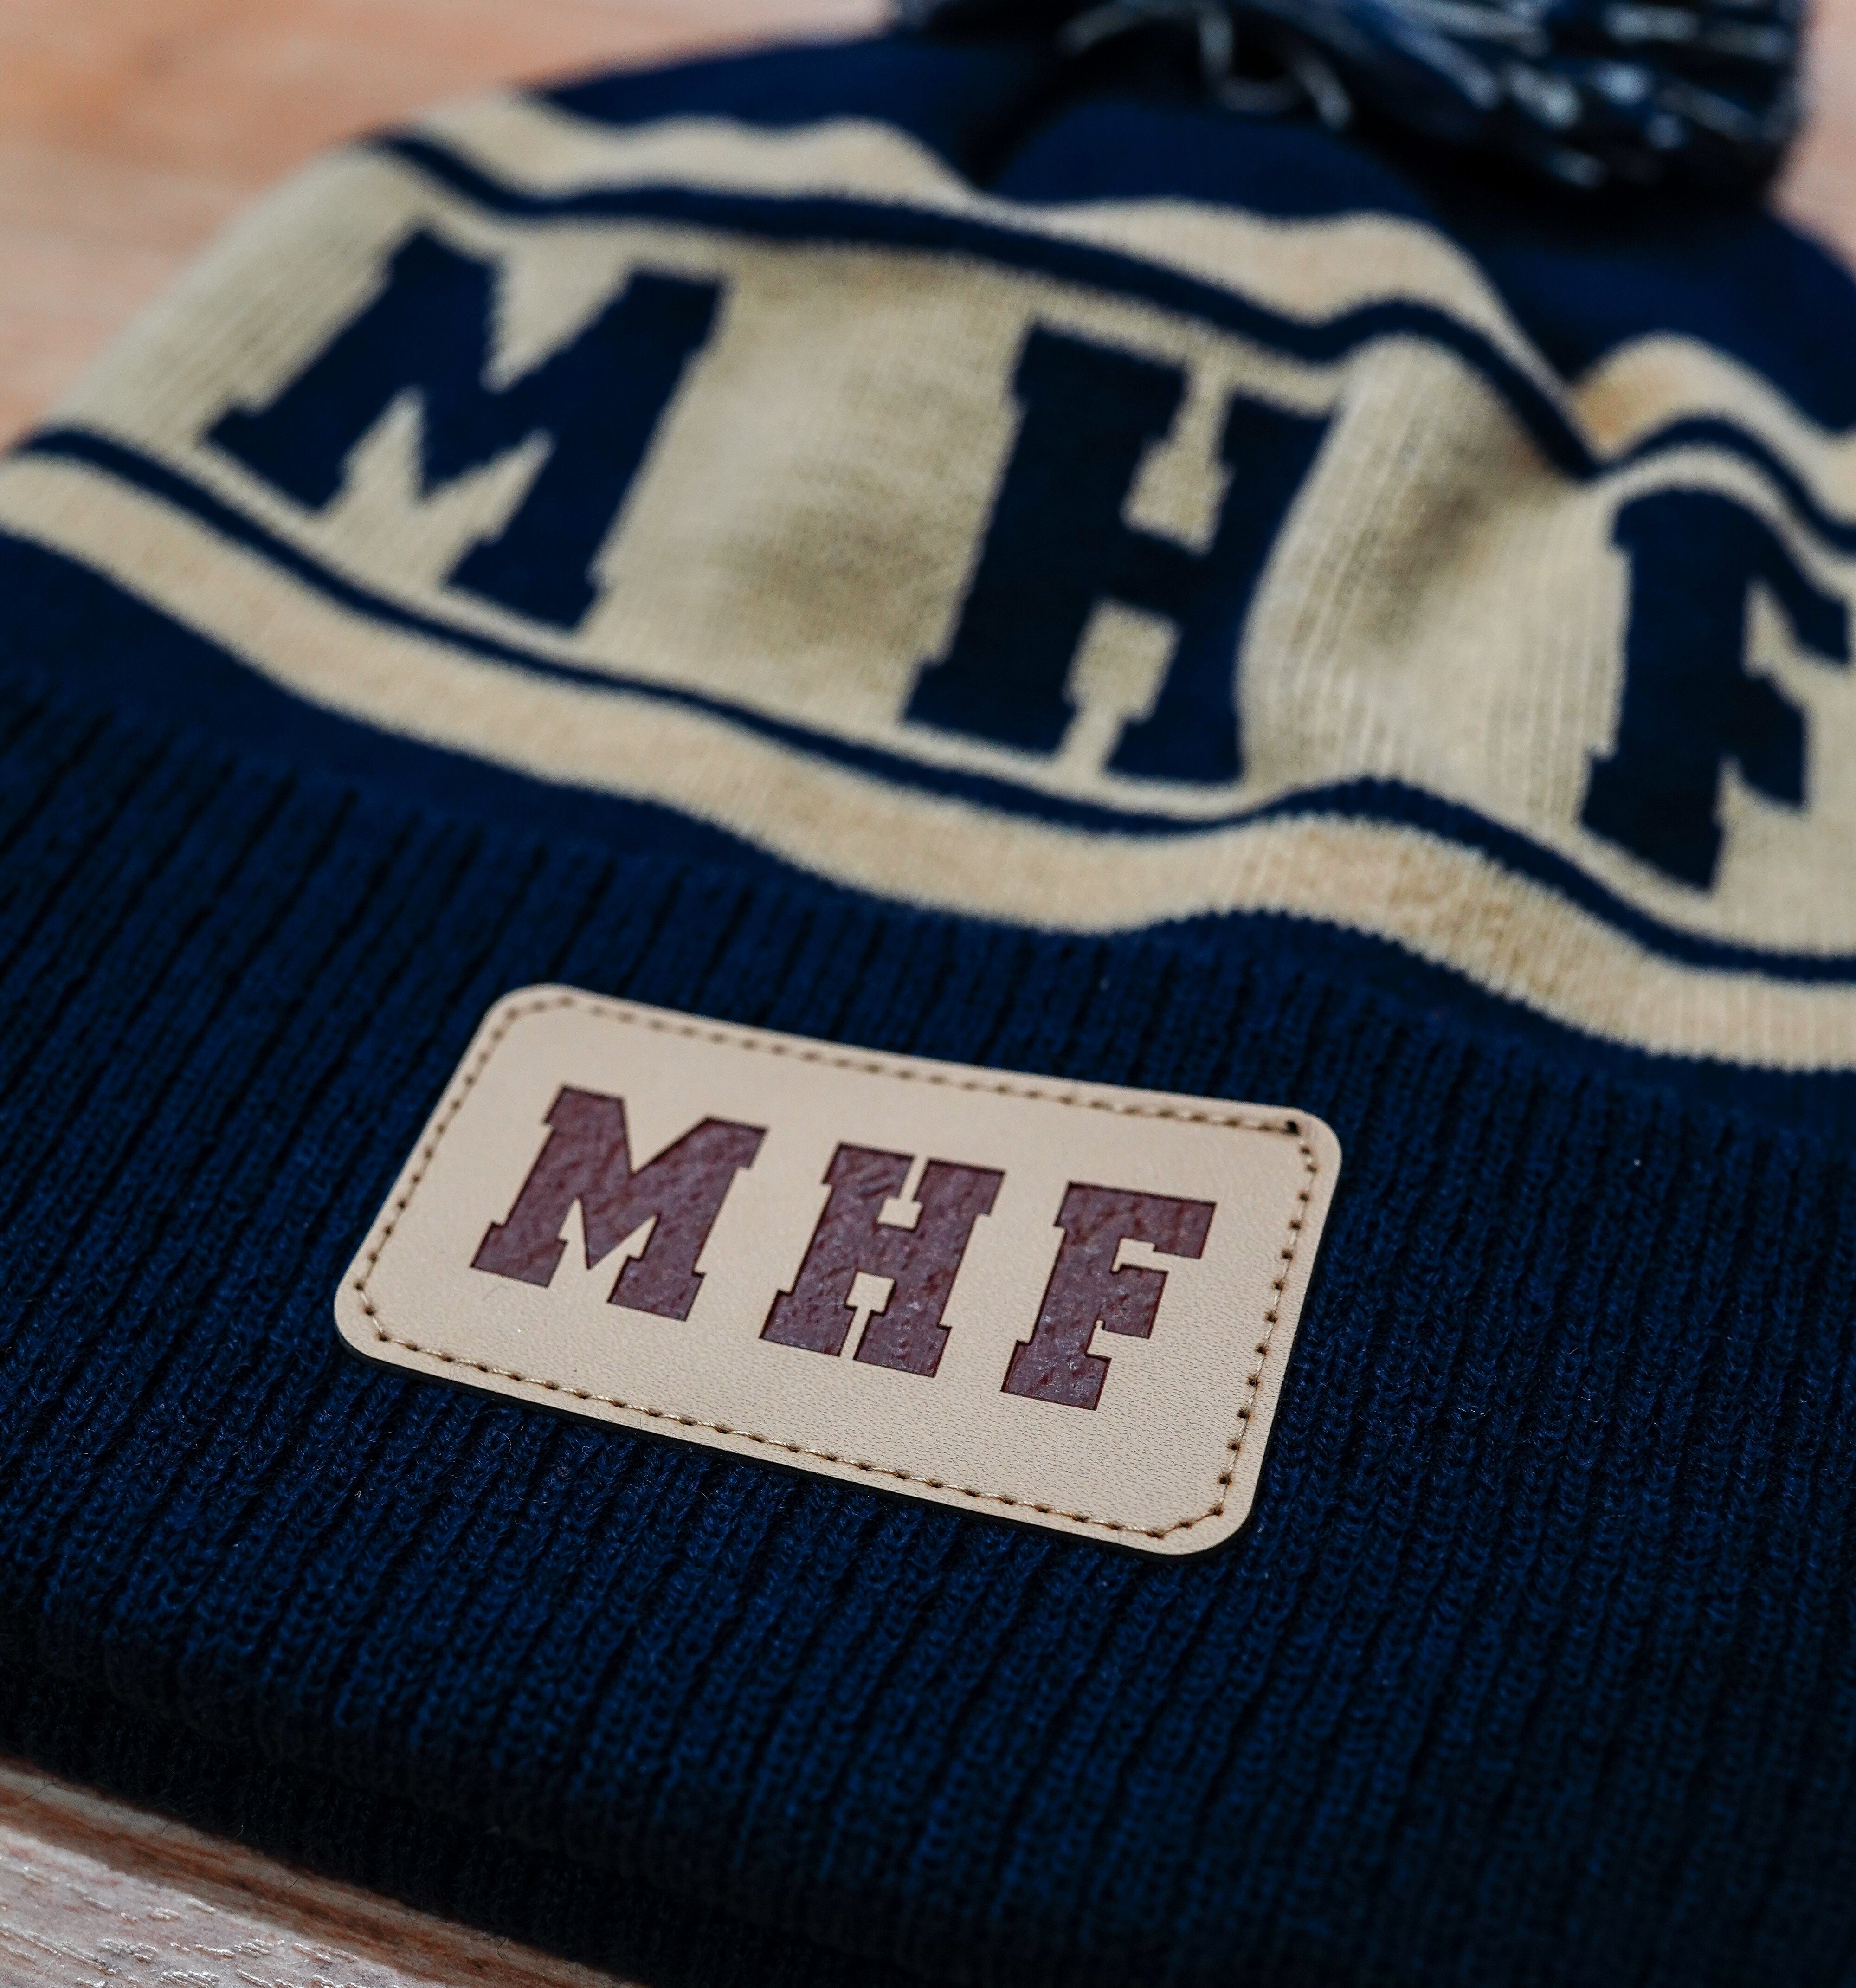 MHF Patch Beanie - Navy/Tan -  - Mansfield Hunting & Fishing - Products to prepare for Corona Virus